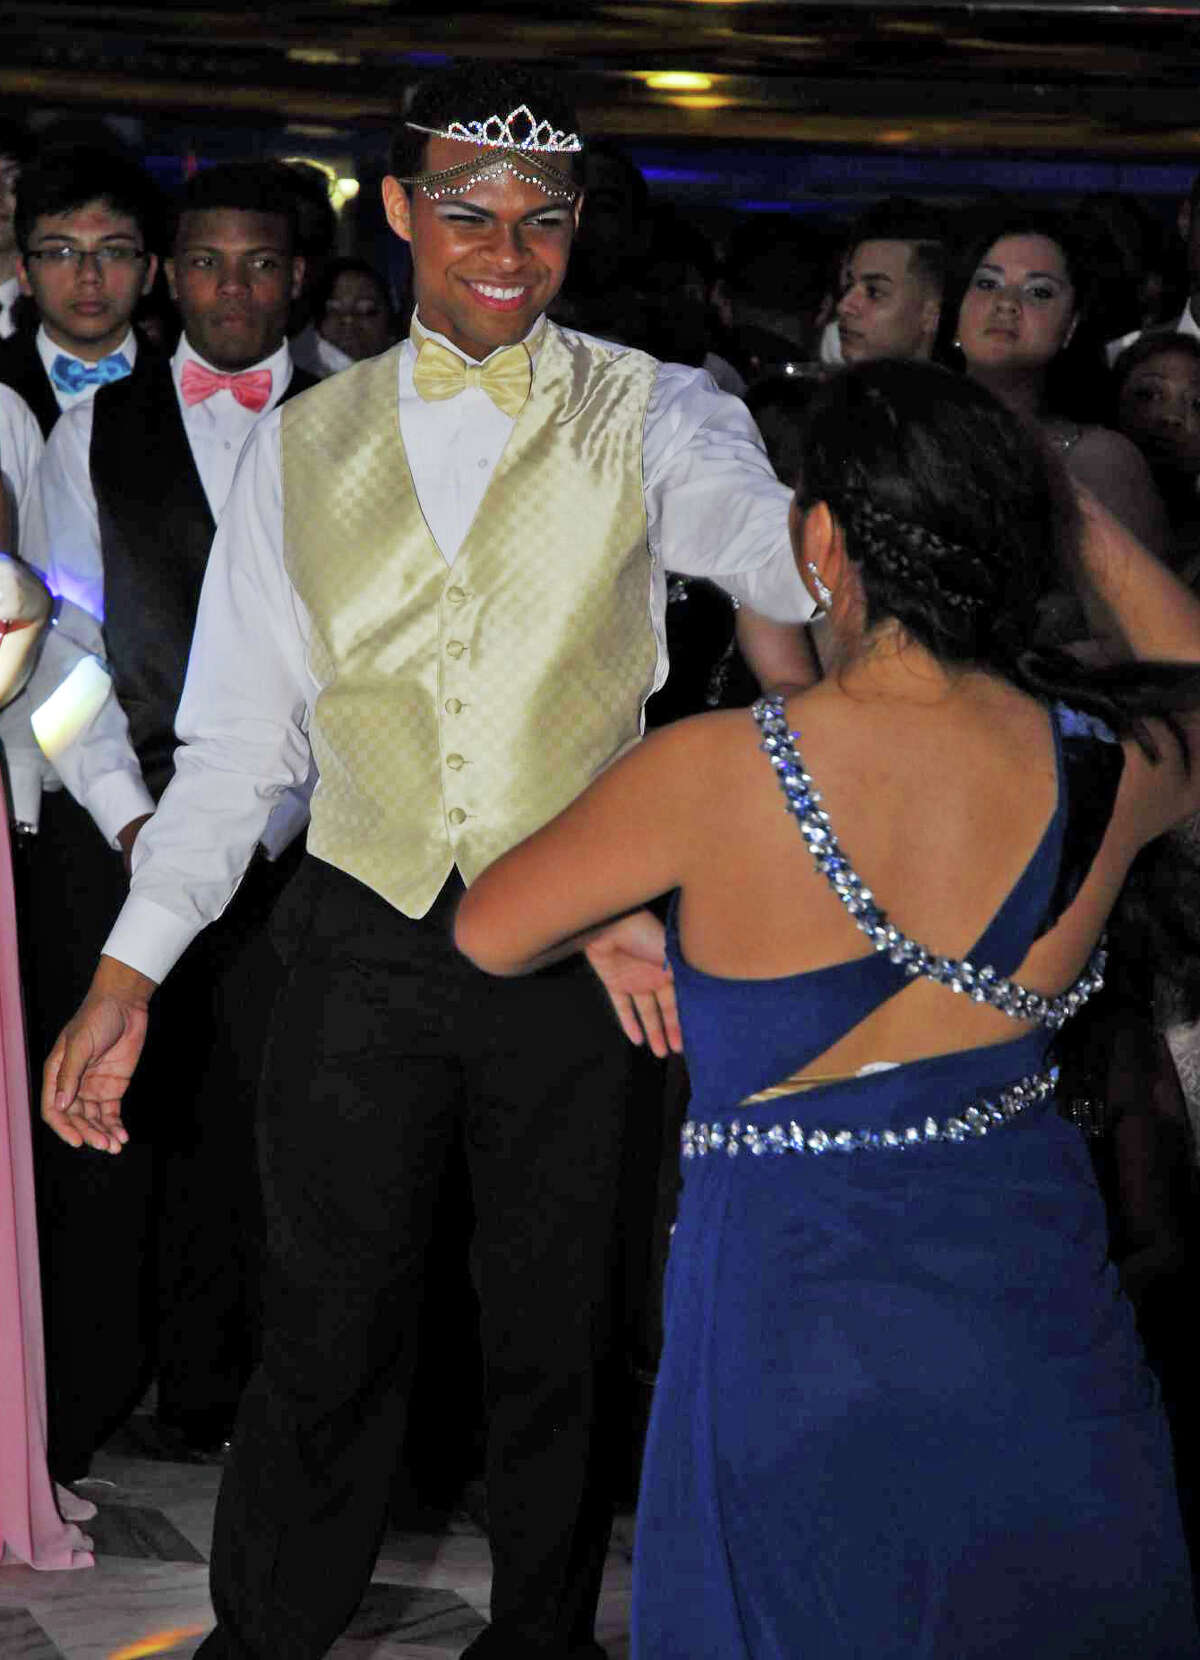 Danbury Highs Male Prom Queen Greeted With Cheers